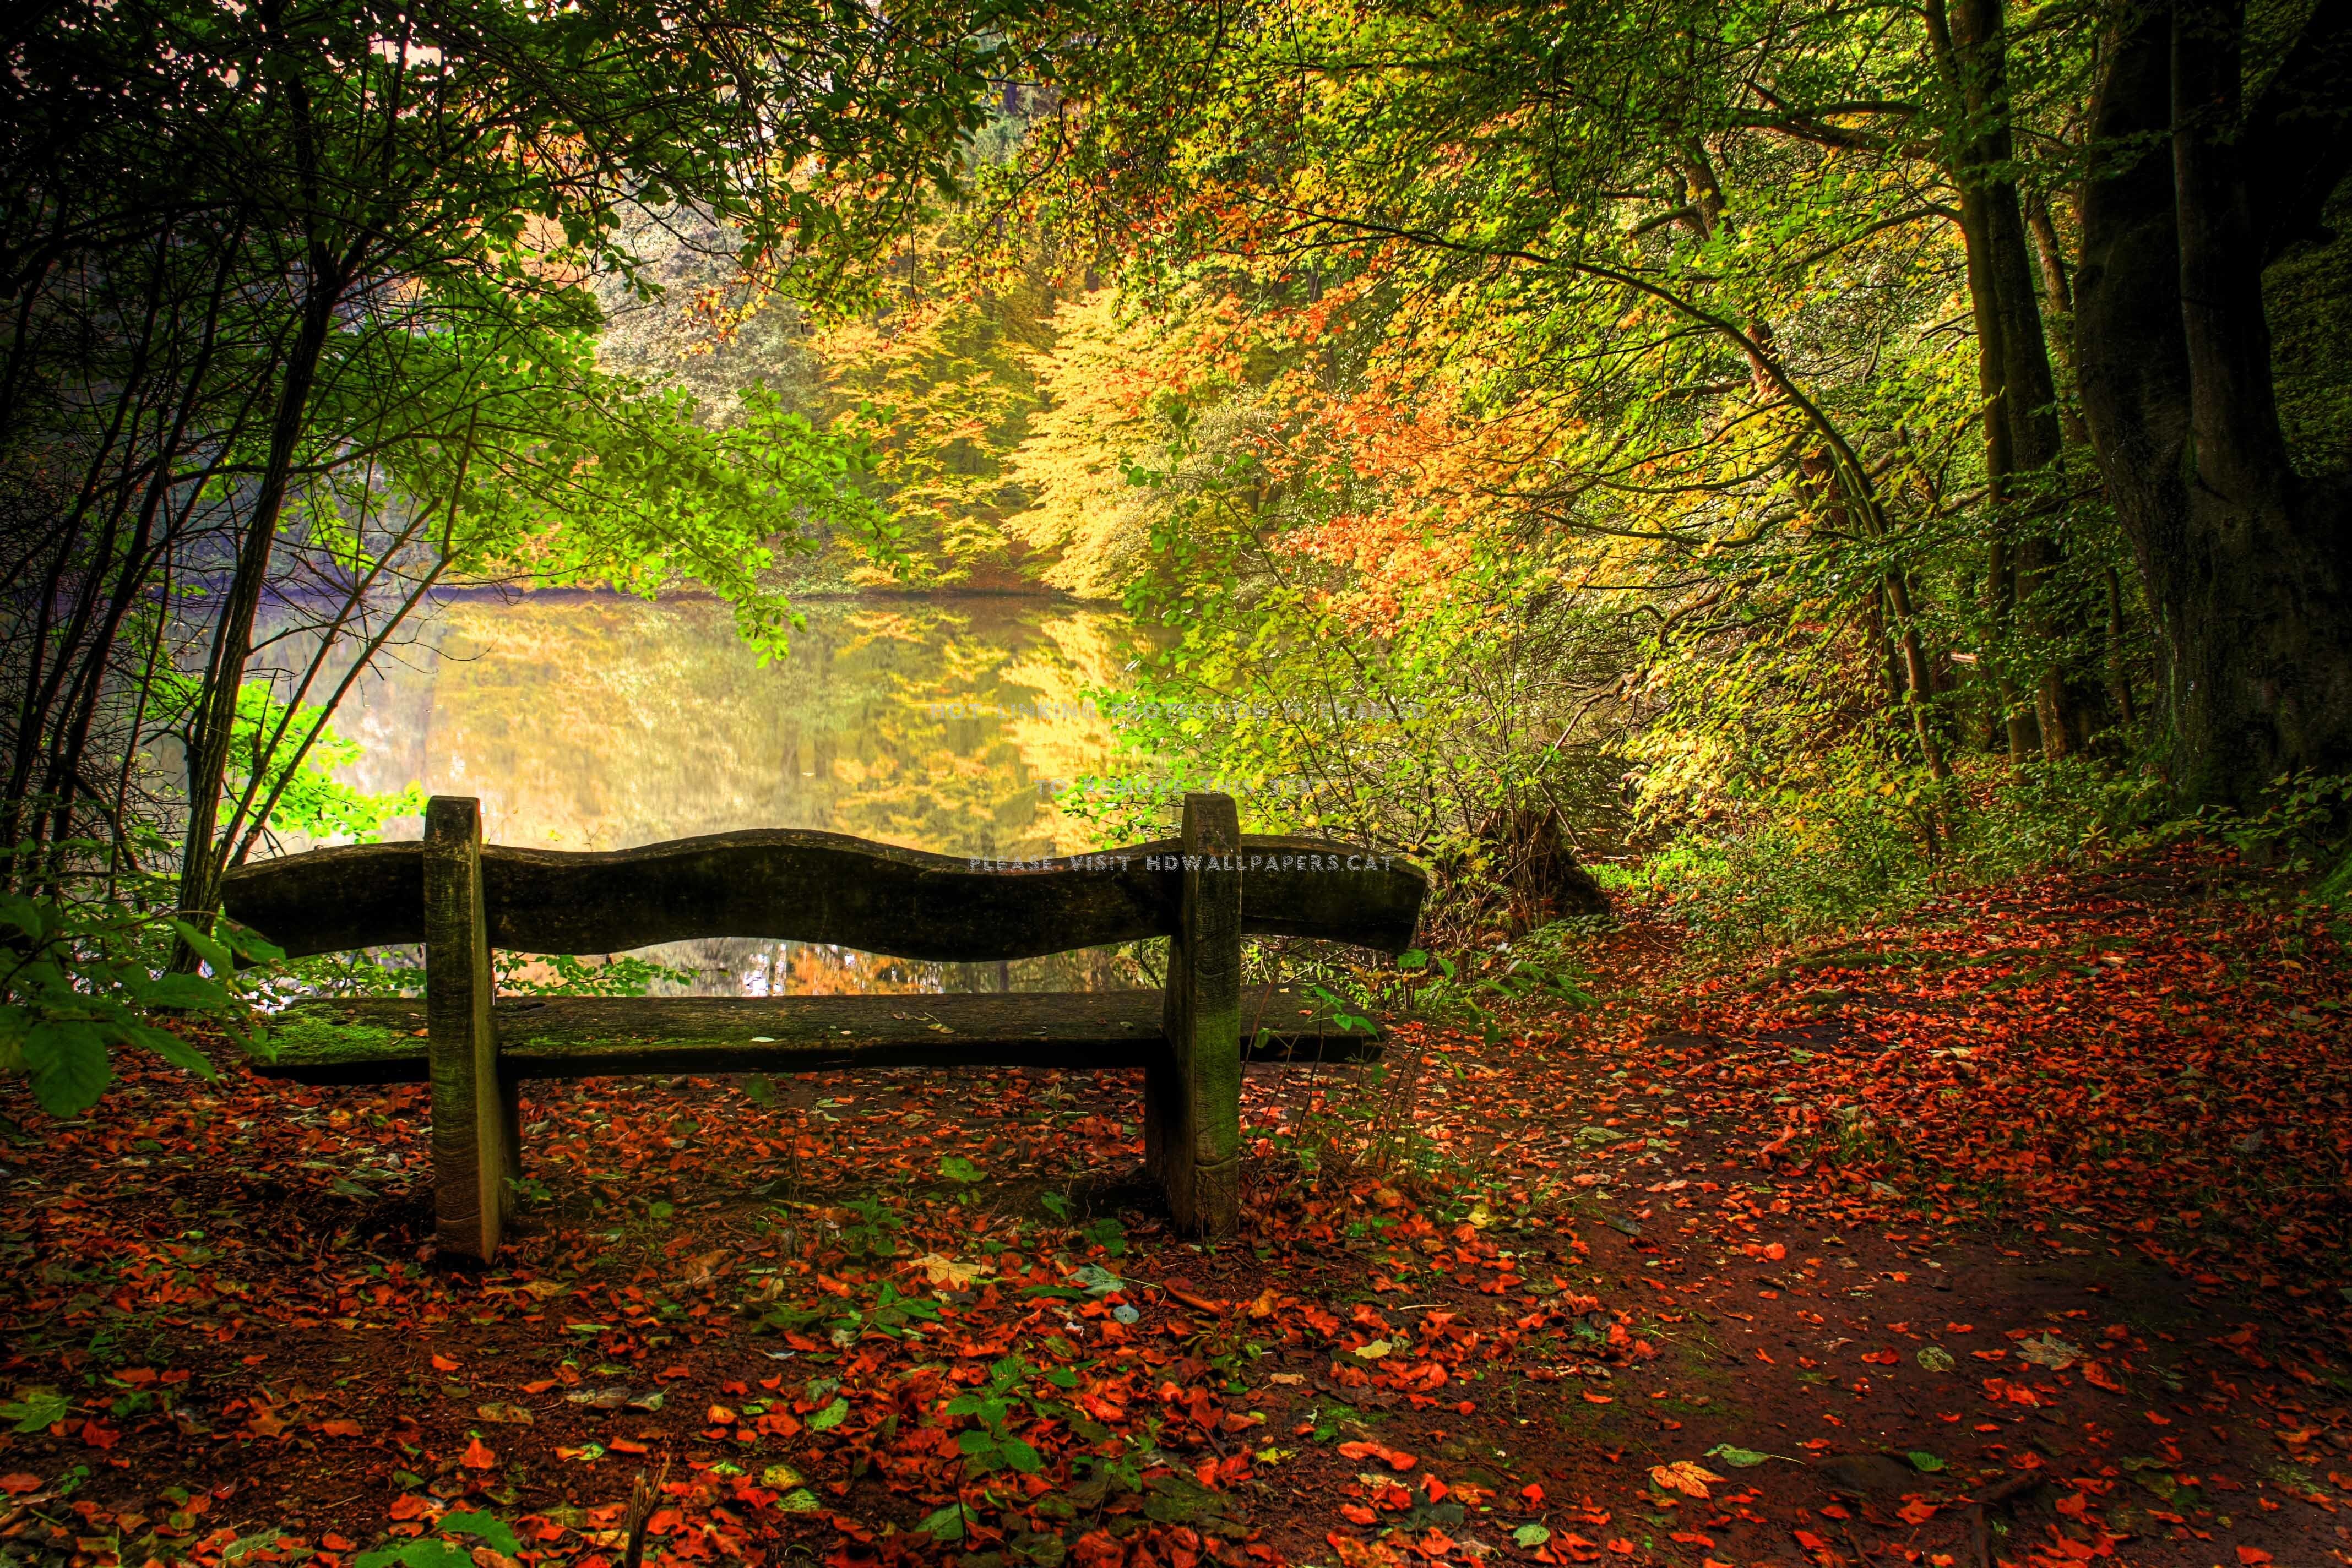 Autumn Hdr Relax Lake Nice Leaves Walks Mix